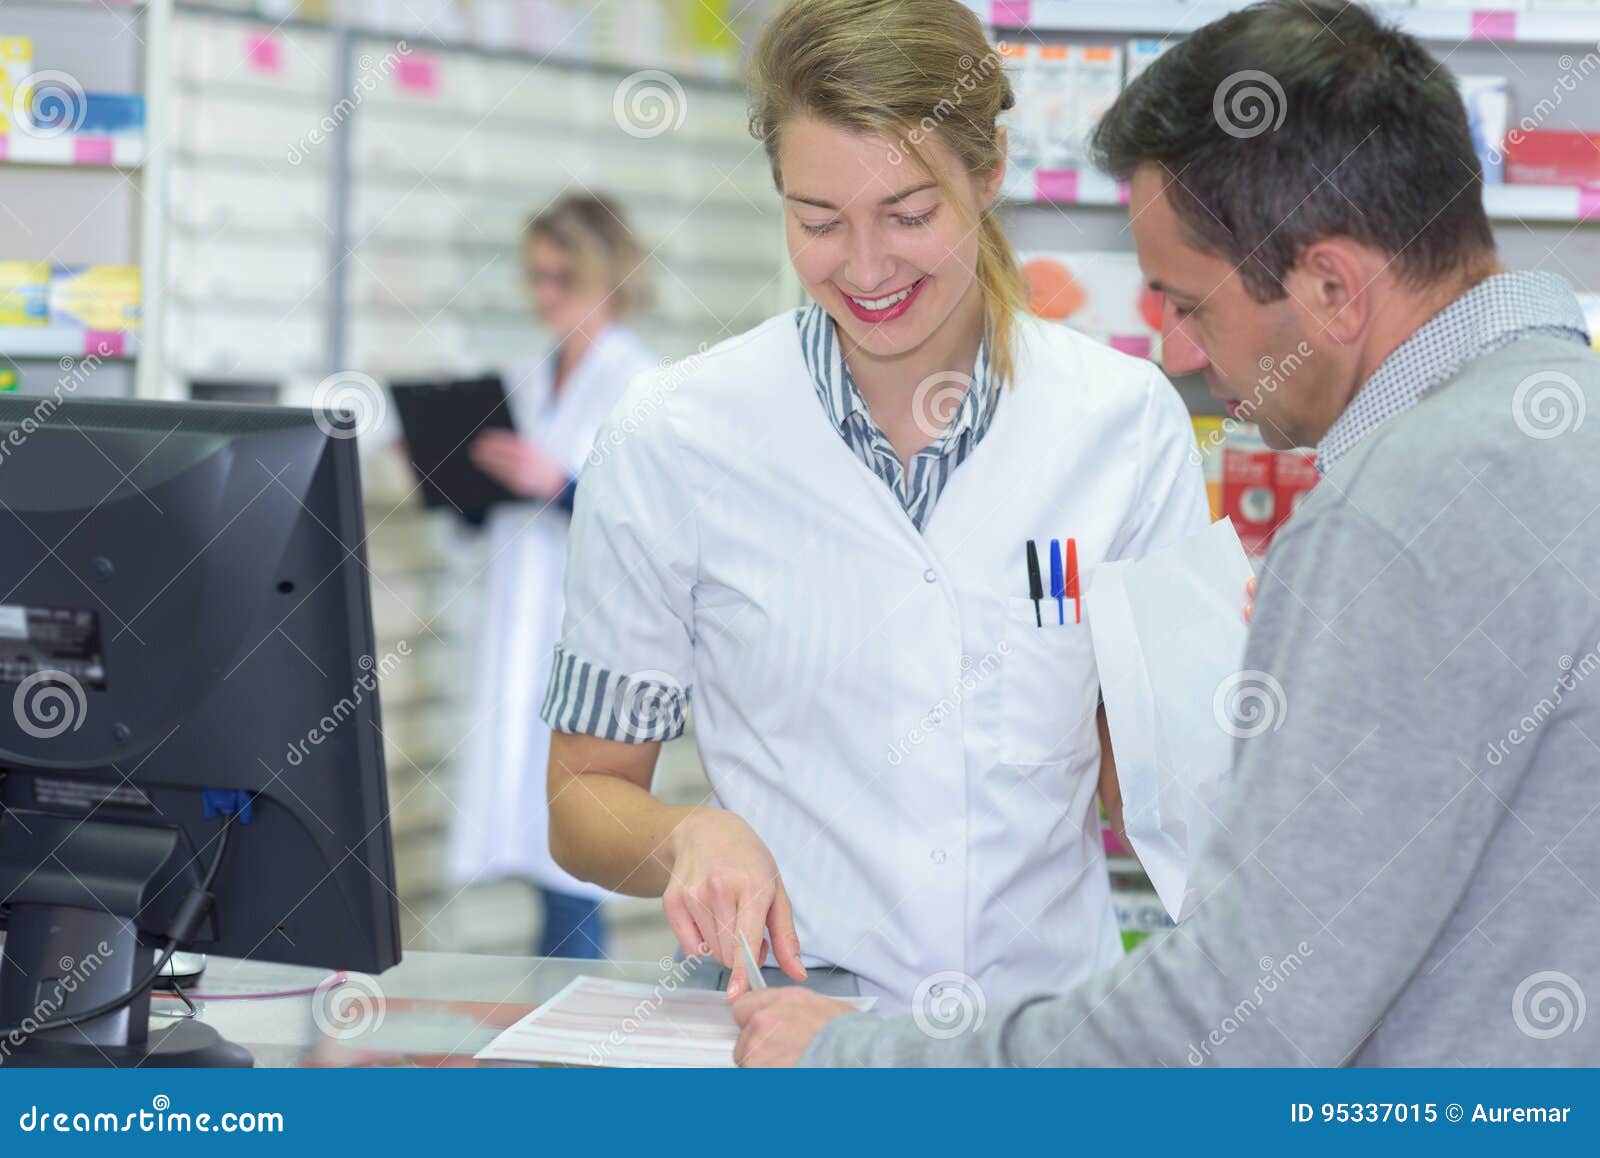 Pharmacist Helping Customer at Counter Place Stock Image - Image of